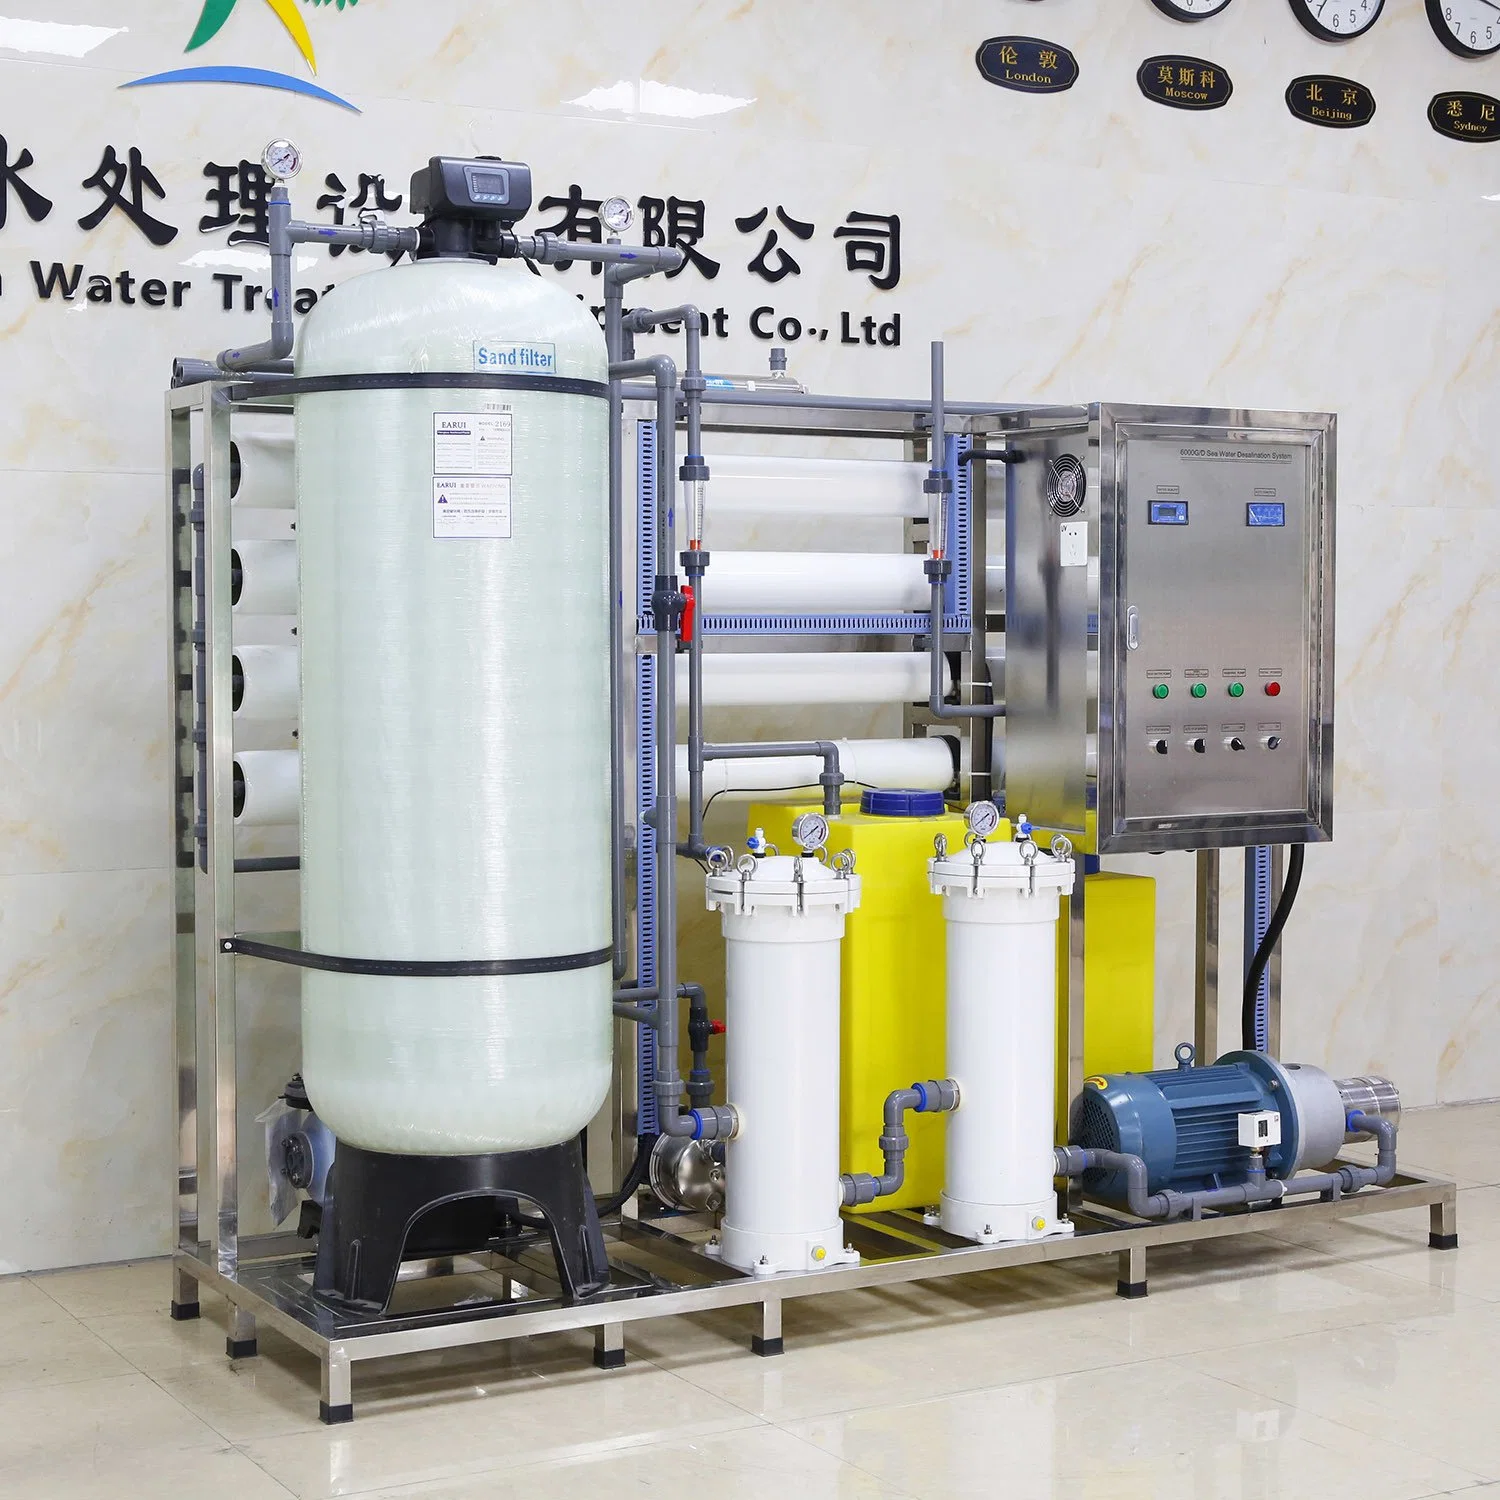 High Salinity Desalination Sea Water Desalination Plant, Seawater Treatment Equipment for Steam Boiler on Boat Ship Yatch 1000lph